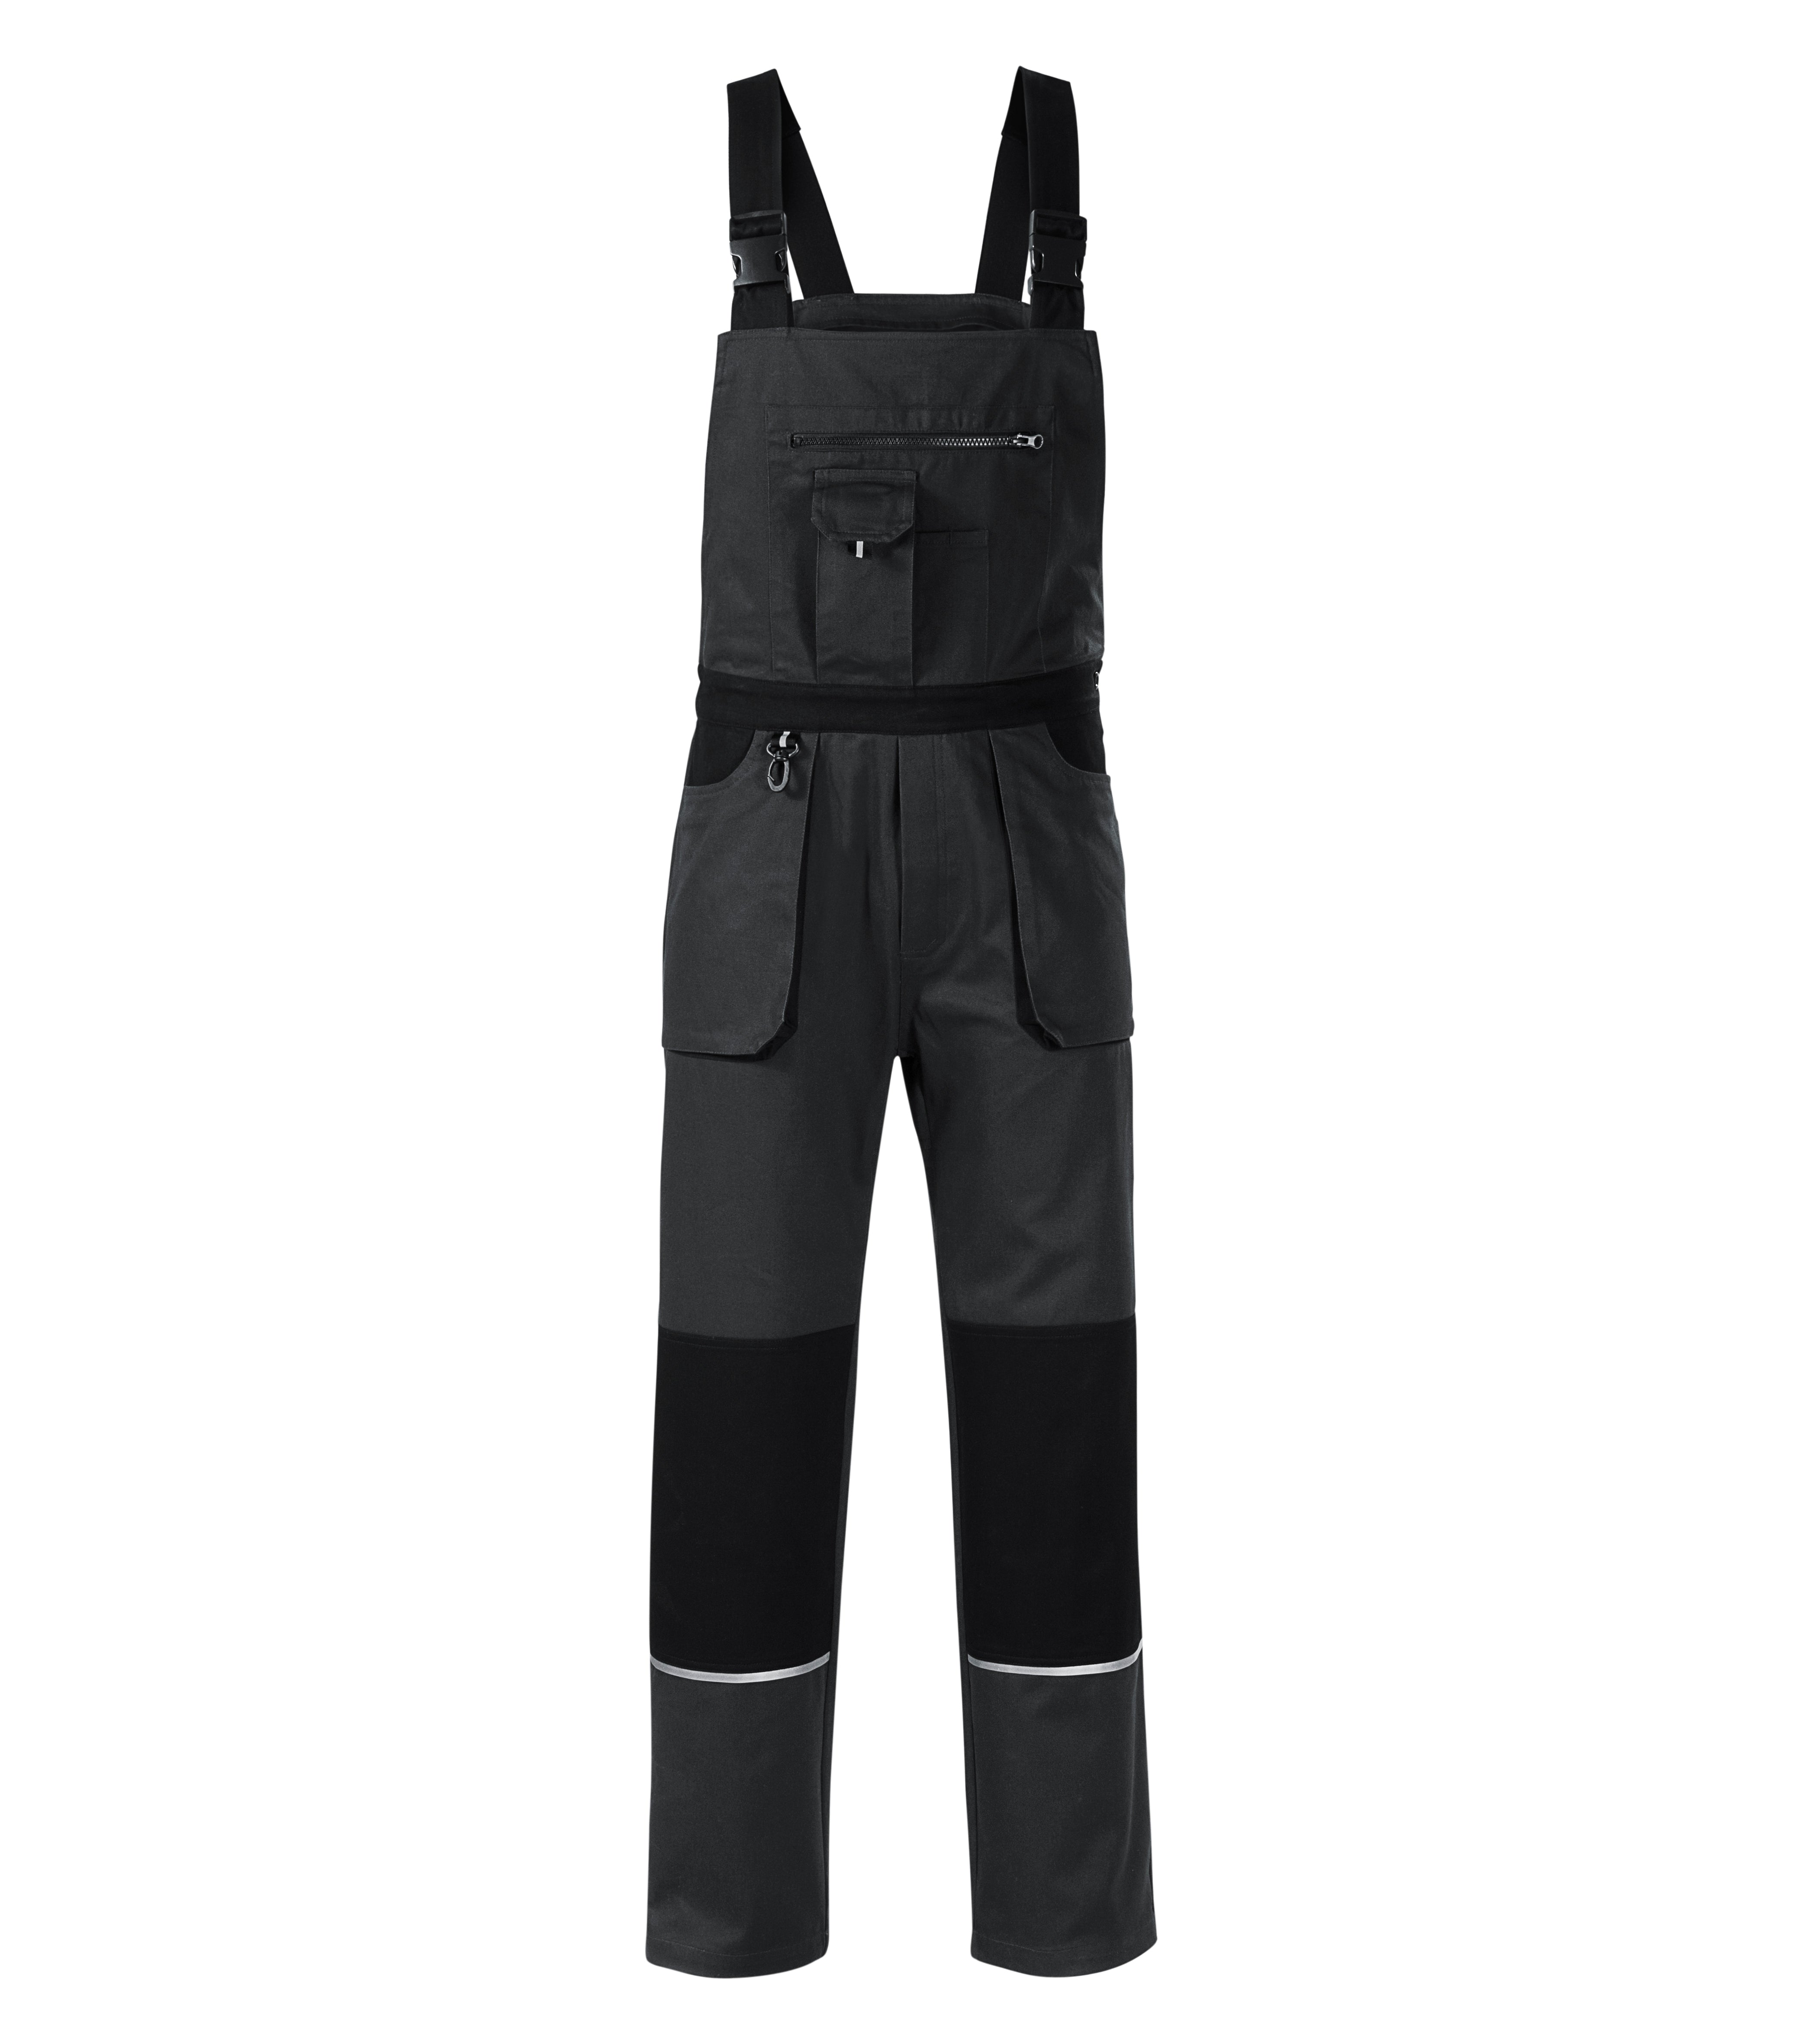 Woody work dungarees